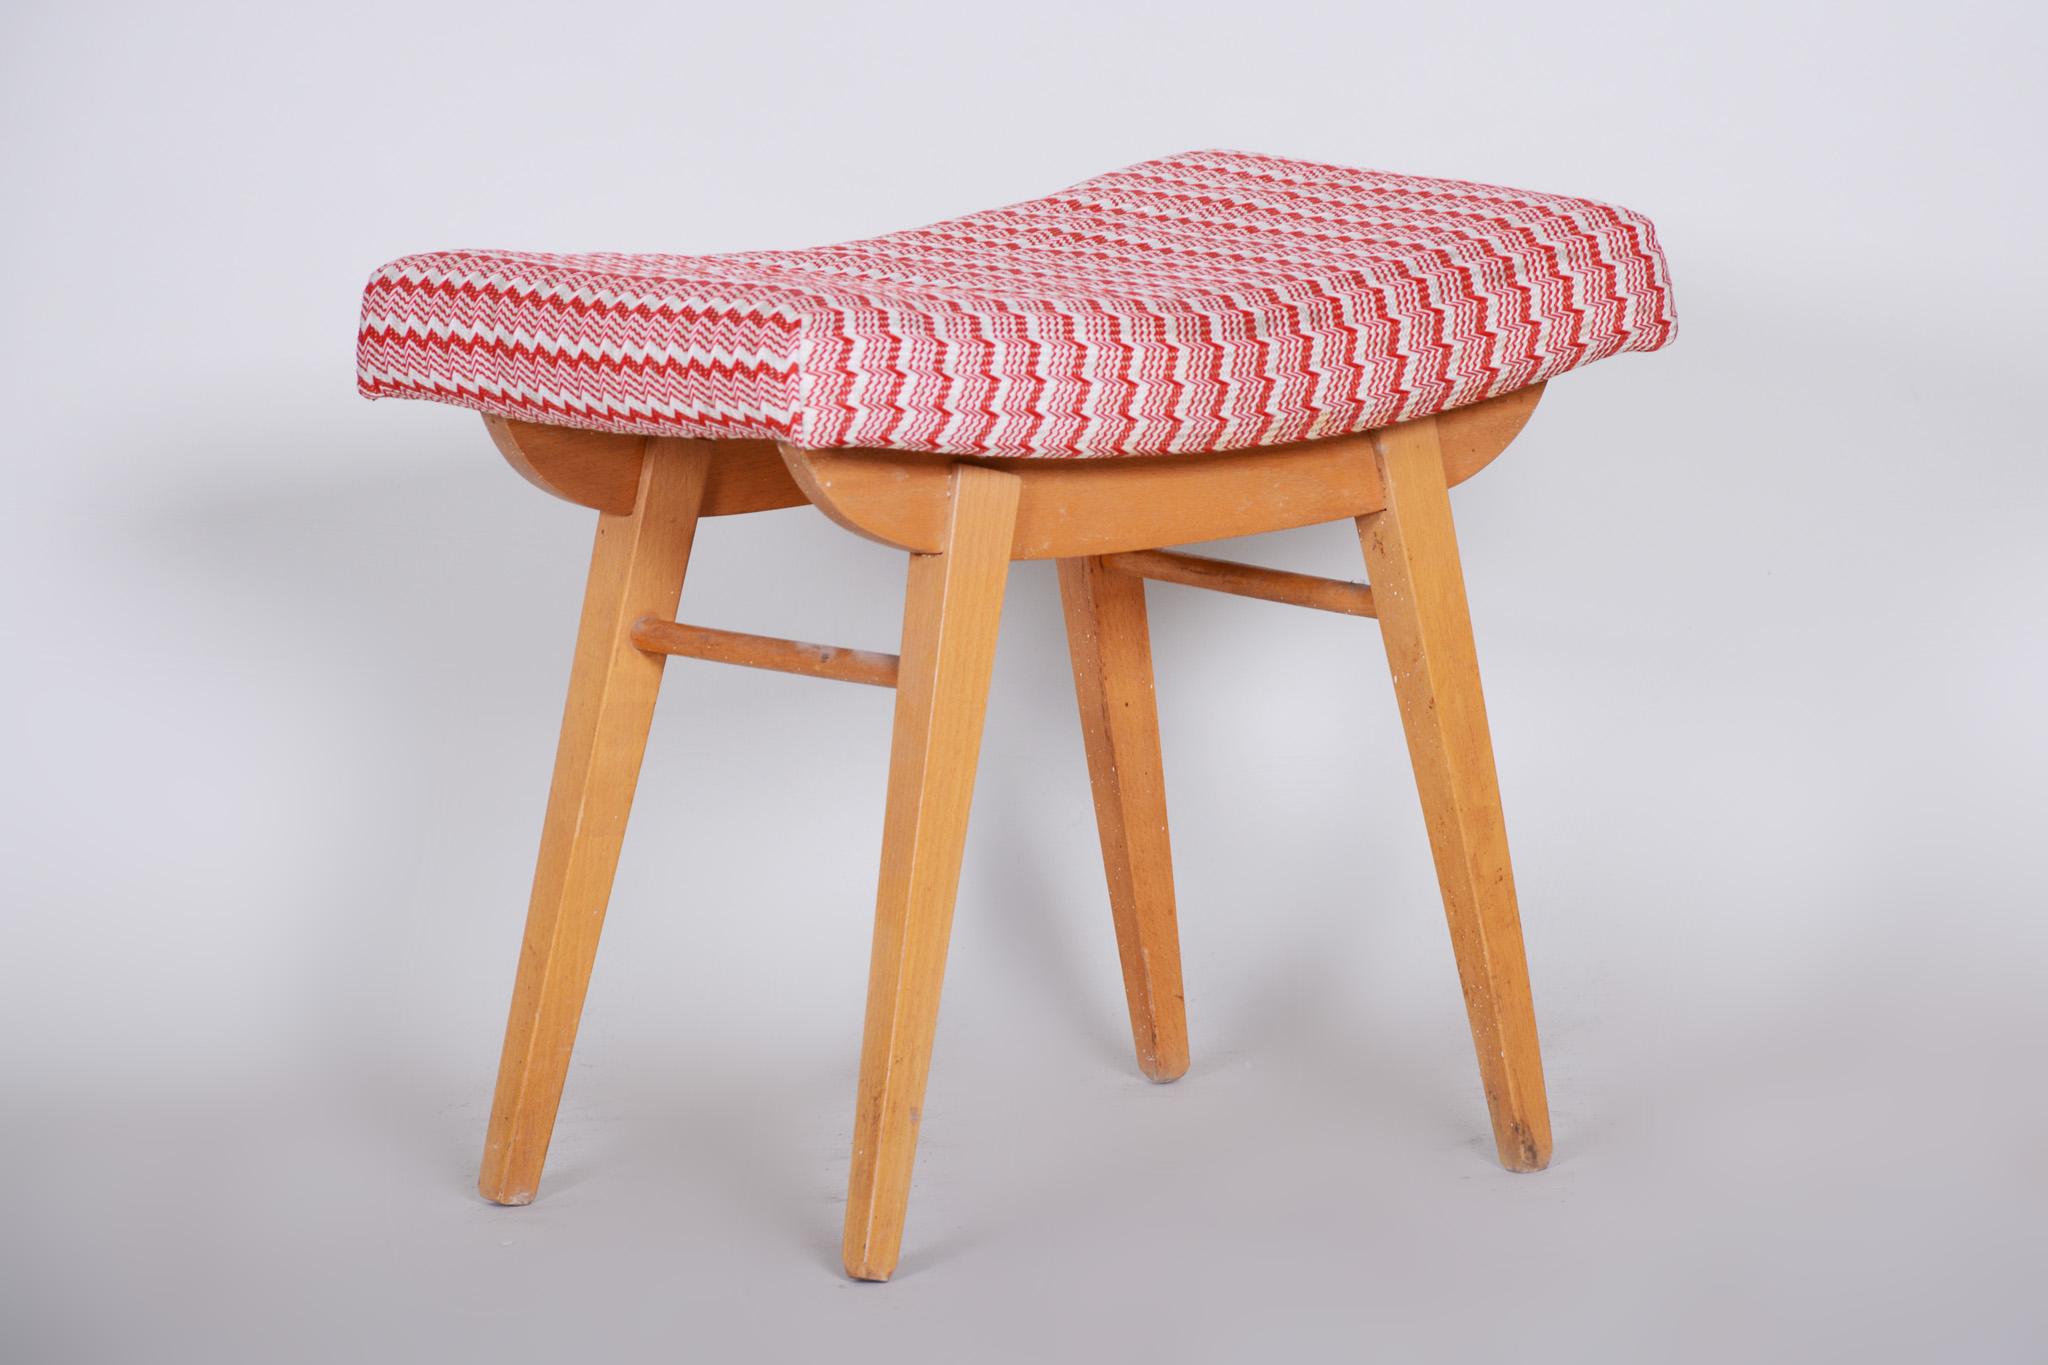 Red and White Midcentury Beech Stool, 1960s, Original Preserved Condition In Good Condition For Sale In Horomerice, CZ